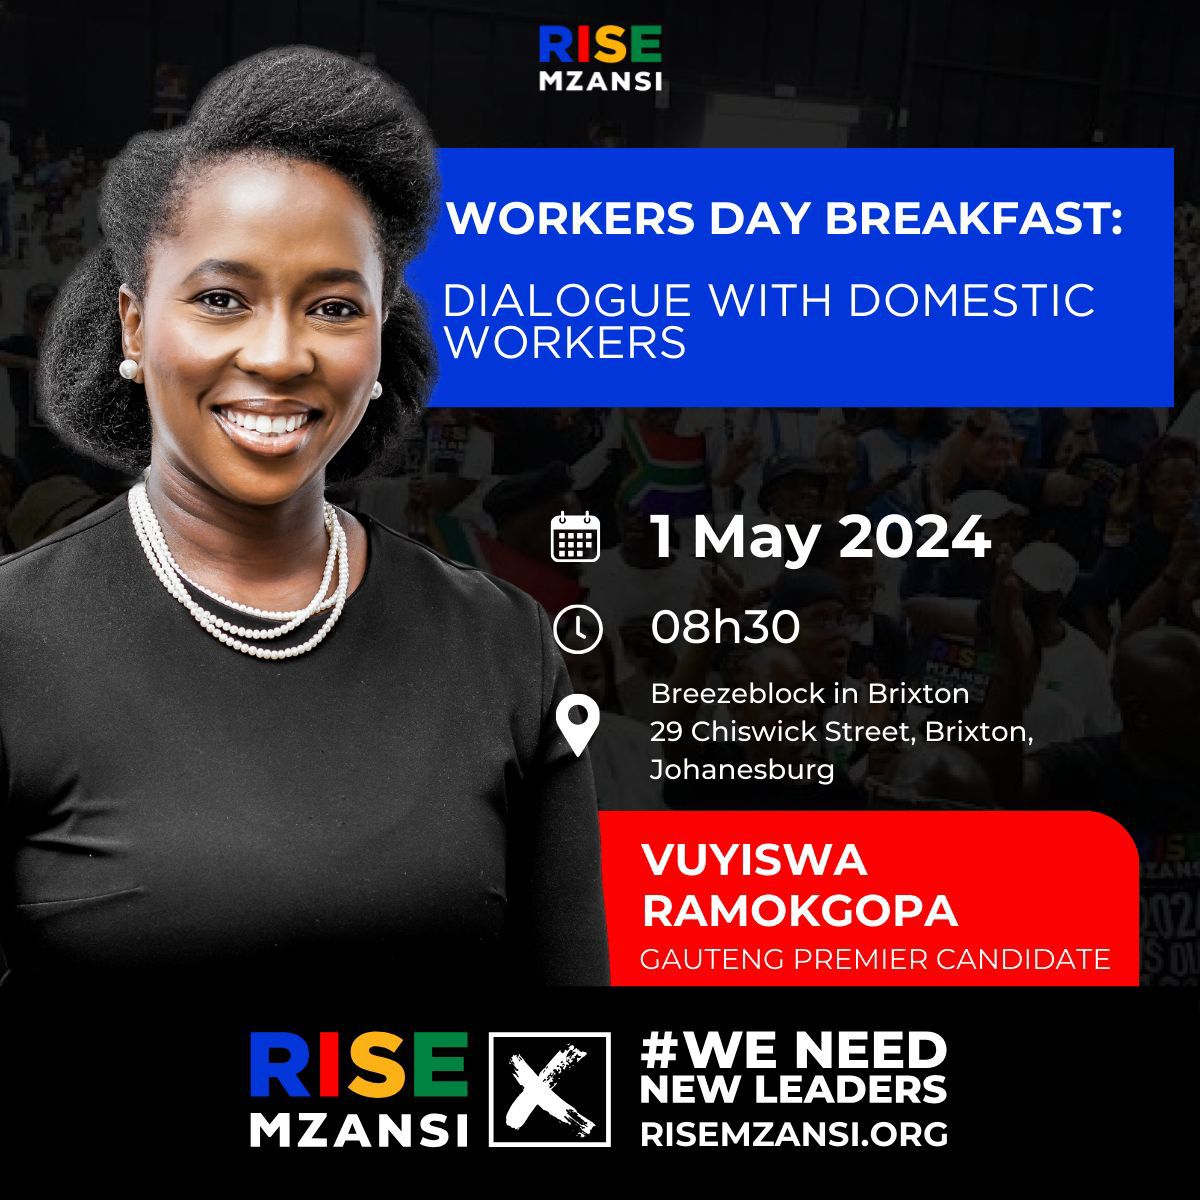 Happy Workers Day! Today we're honouring workers and hosting a breakfast with domestic workers who are the true back-bone of this economy and this country and whose work is often unseen and undervalued ✊🏾✊🏾 #WorkersDay #Transformations #CareforTheCarers